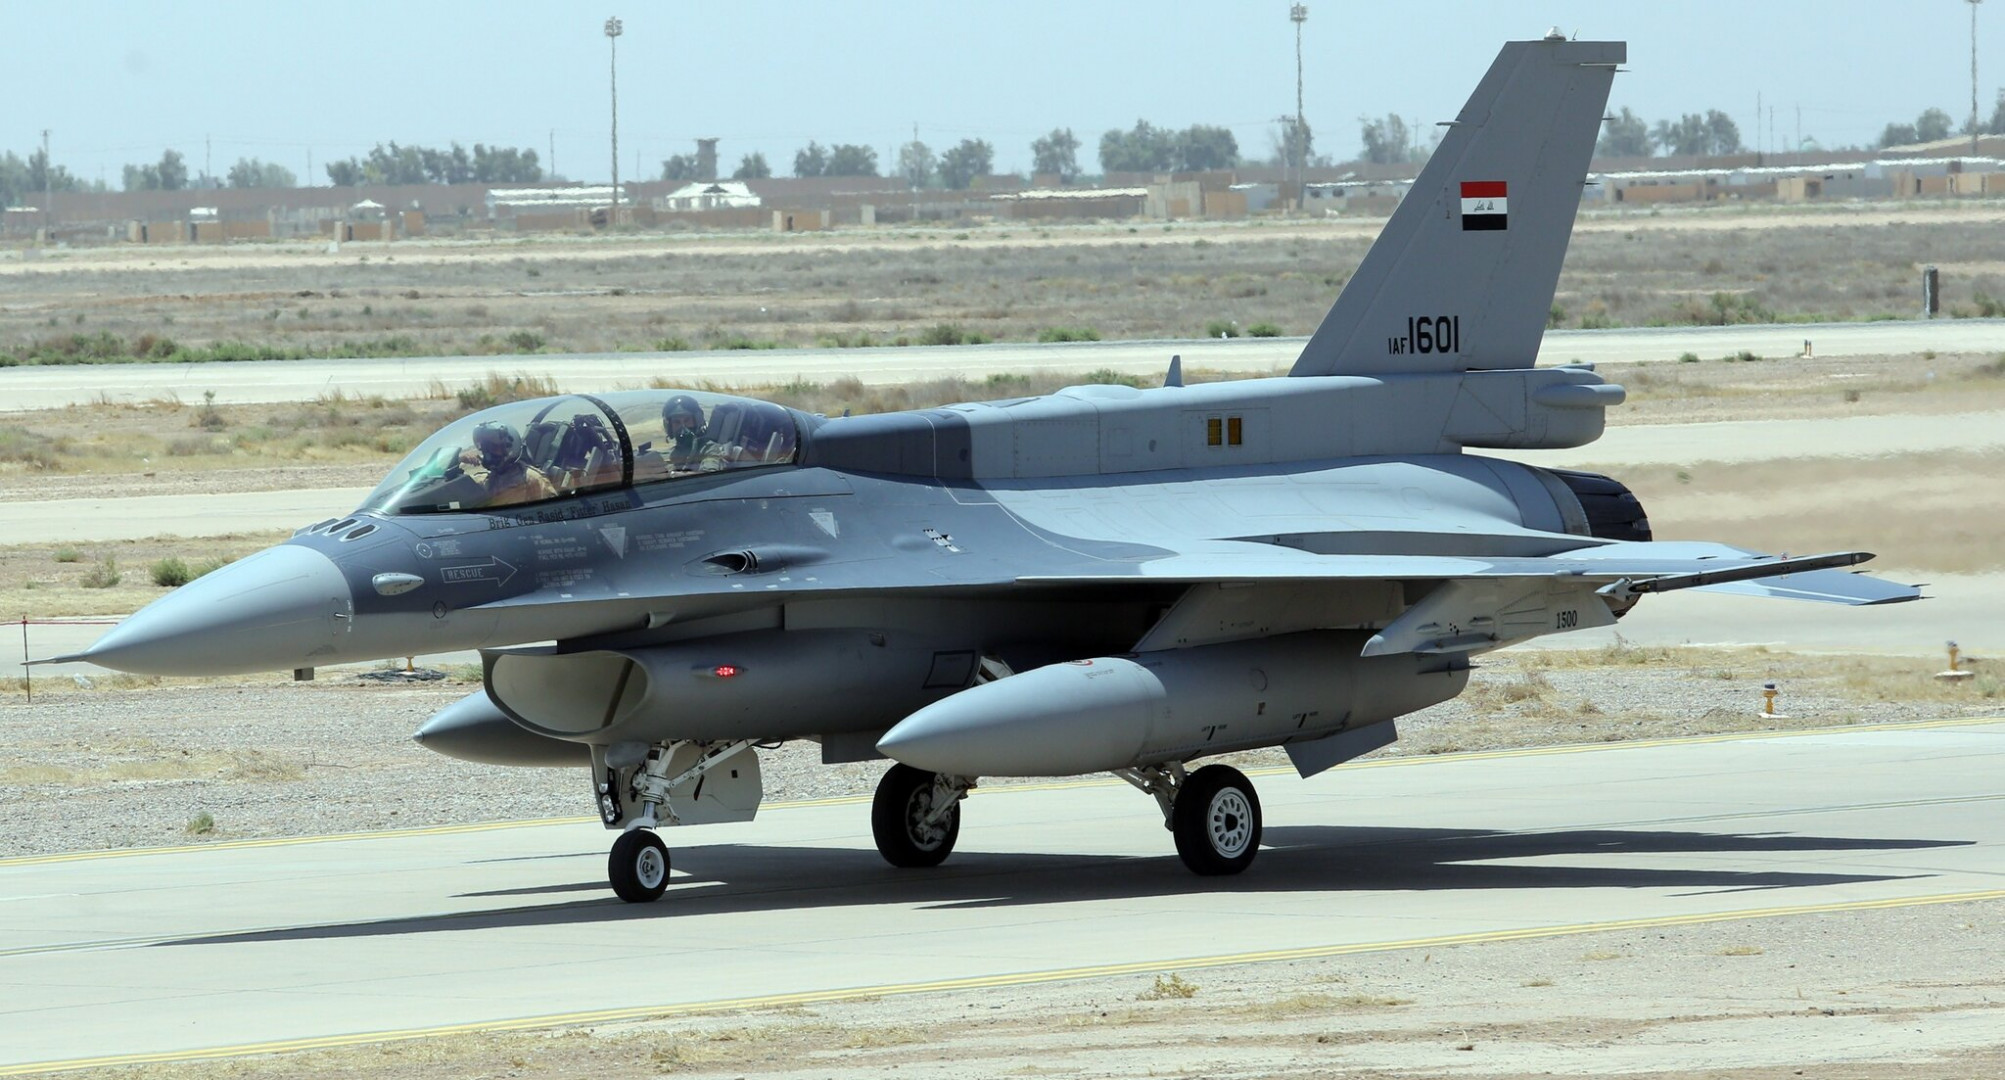 Lockheed Martin withdraws contractors from Iraq over security fears 